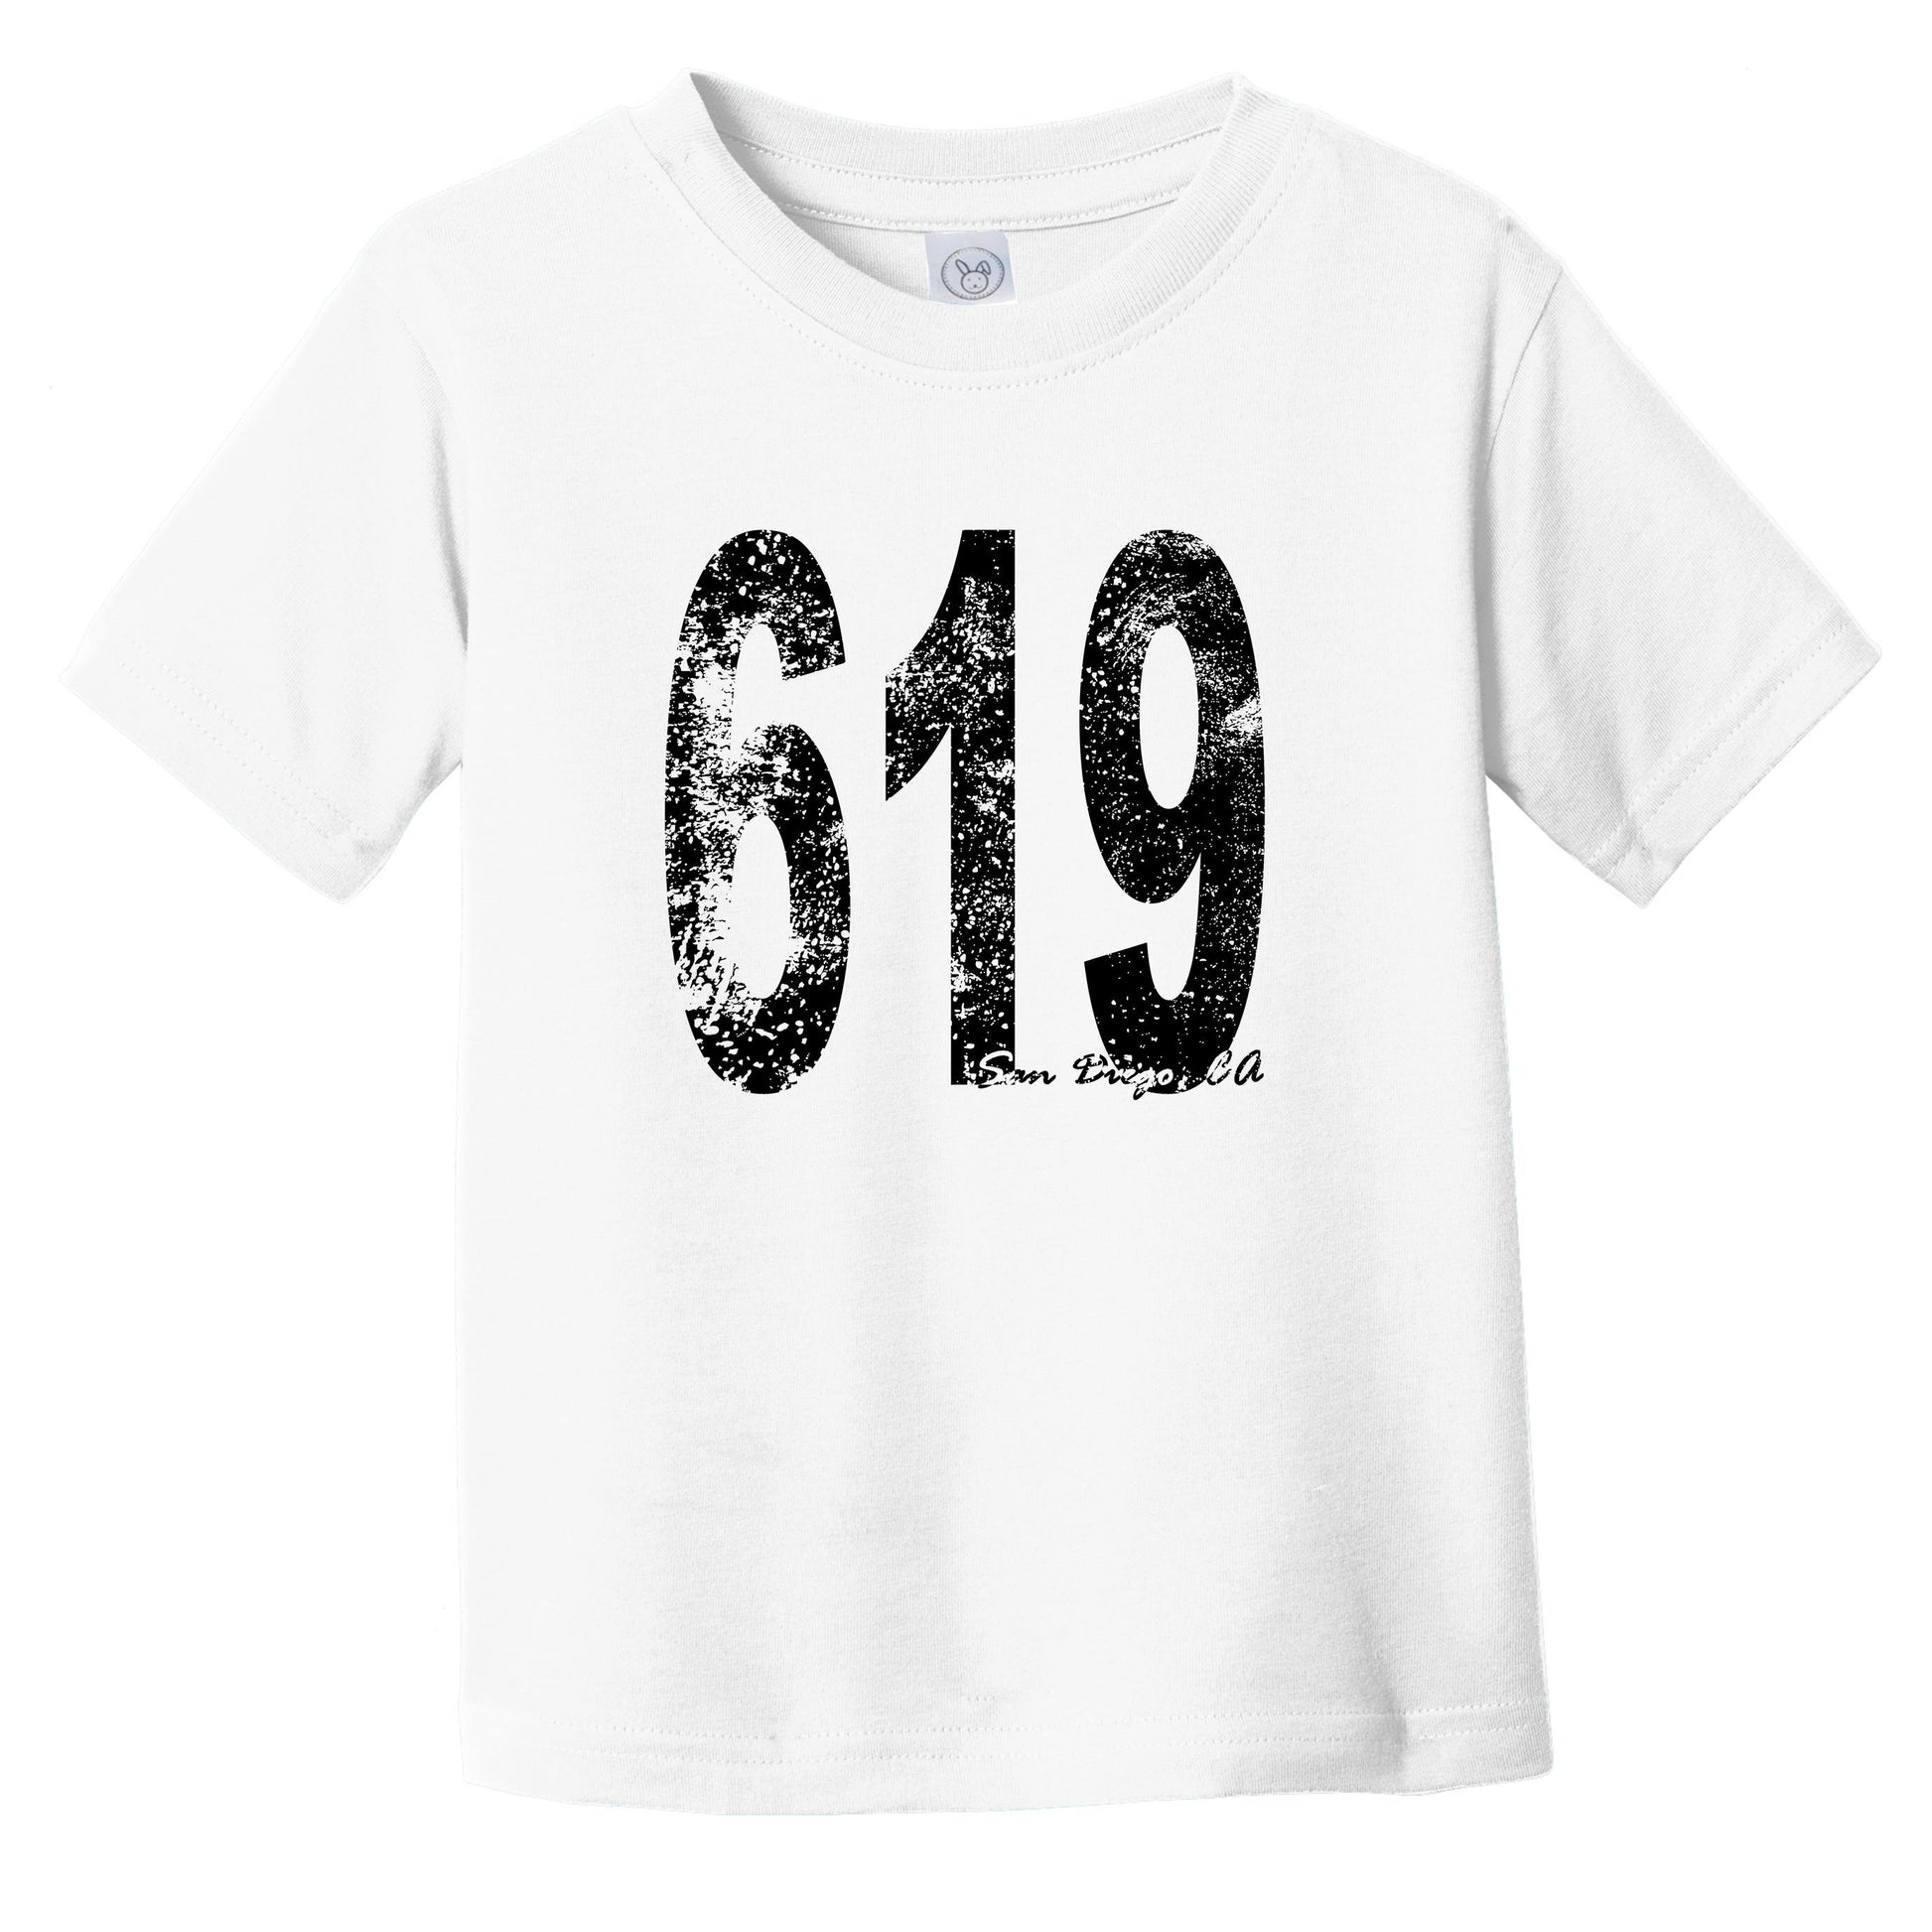 619 San Diego California Area Code Infant Toddler T-Shirt